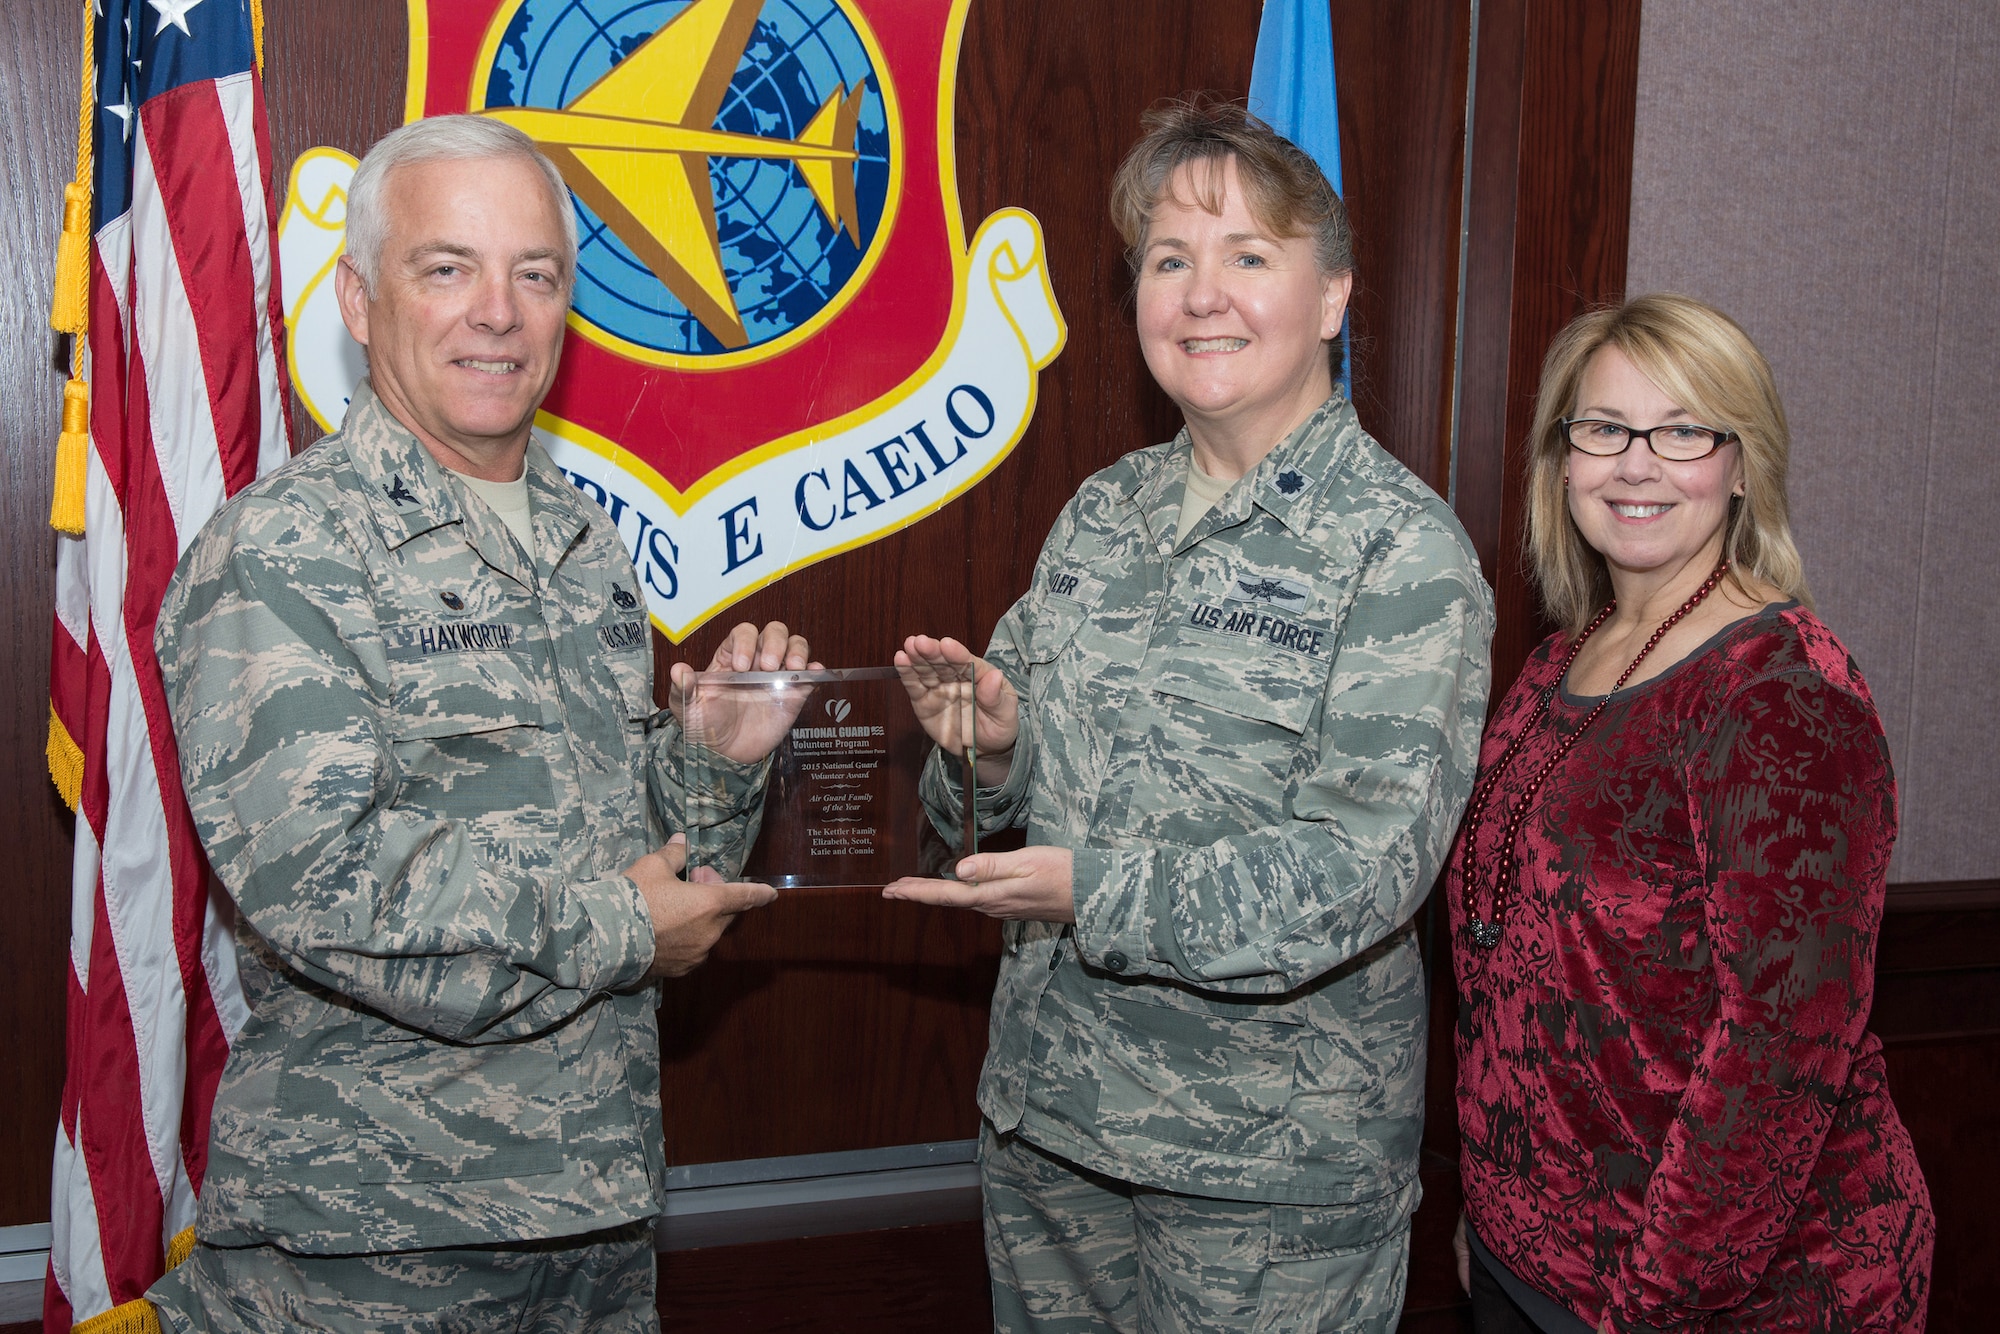 Lt. Col. Elizabeth Kettler receives the 2015 Air National Guard Family of the Year award from Col. Douglas Hayworth, commander of the 137th Mission Support Group, Oklahoma Air National Guard. Also pictured is Pam Reeds, lead child and youth program coordinator for the Oklahoma National Guard.